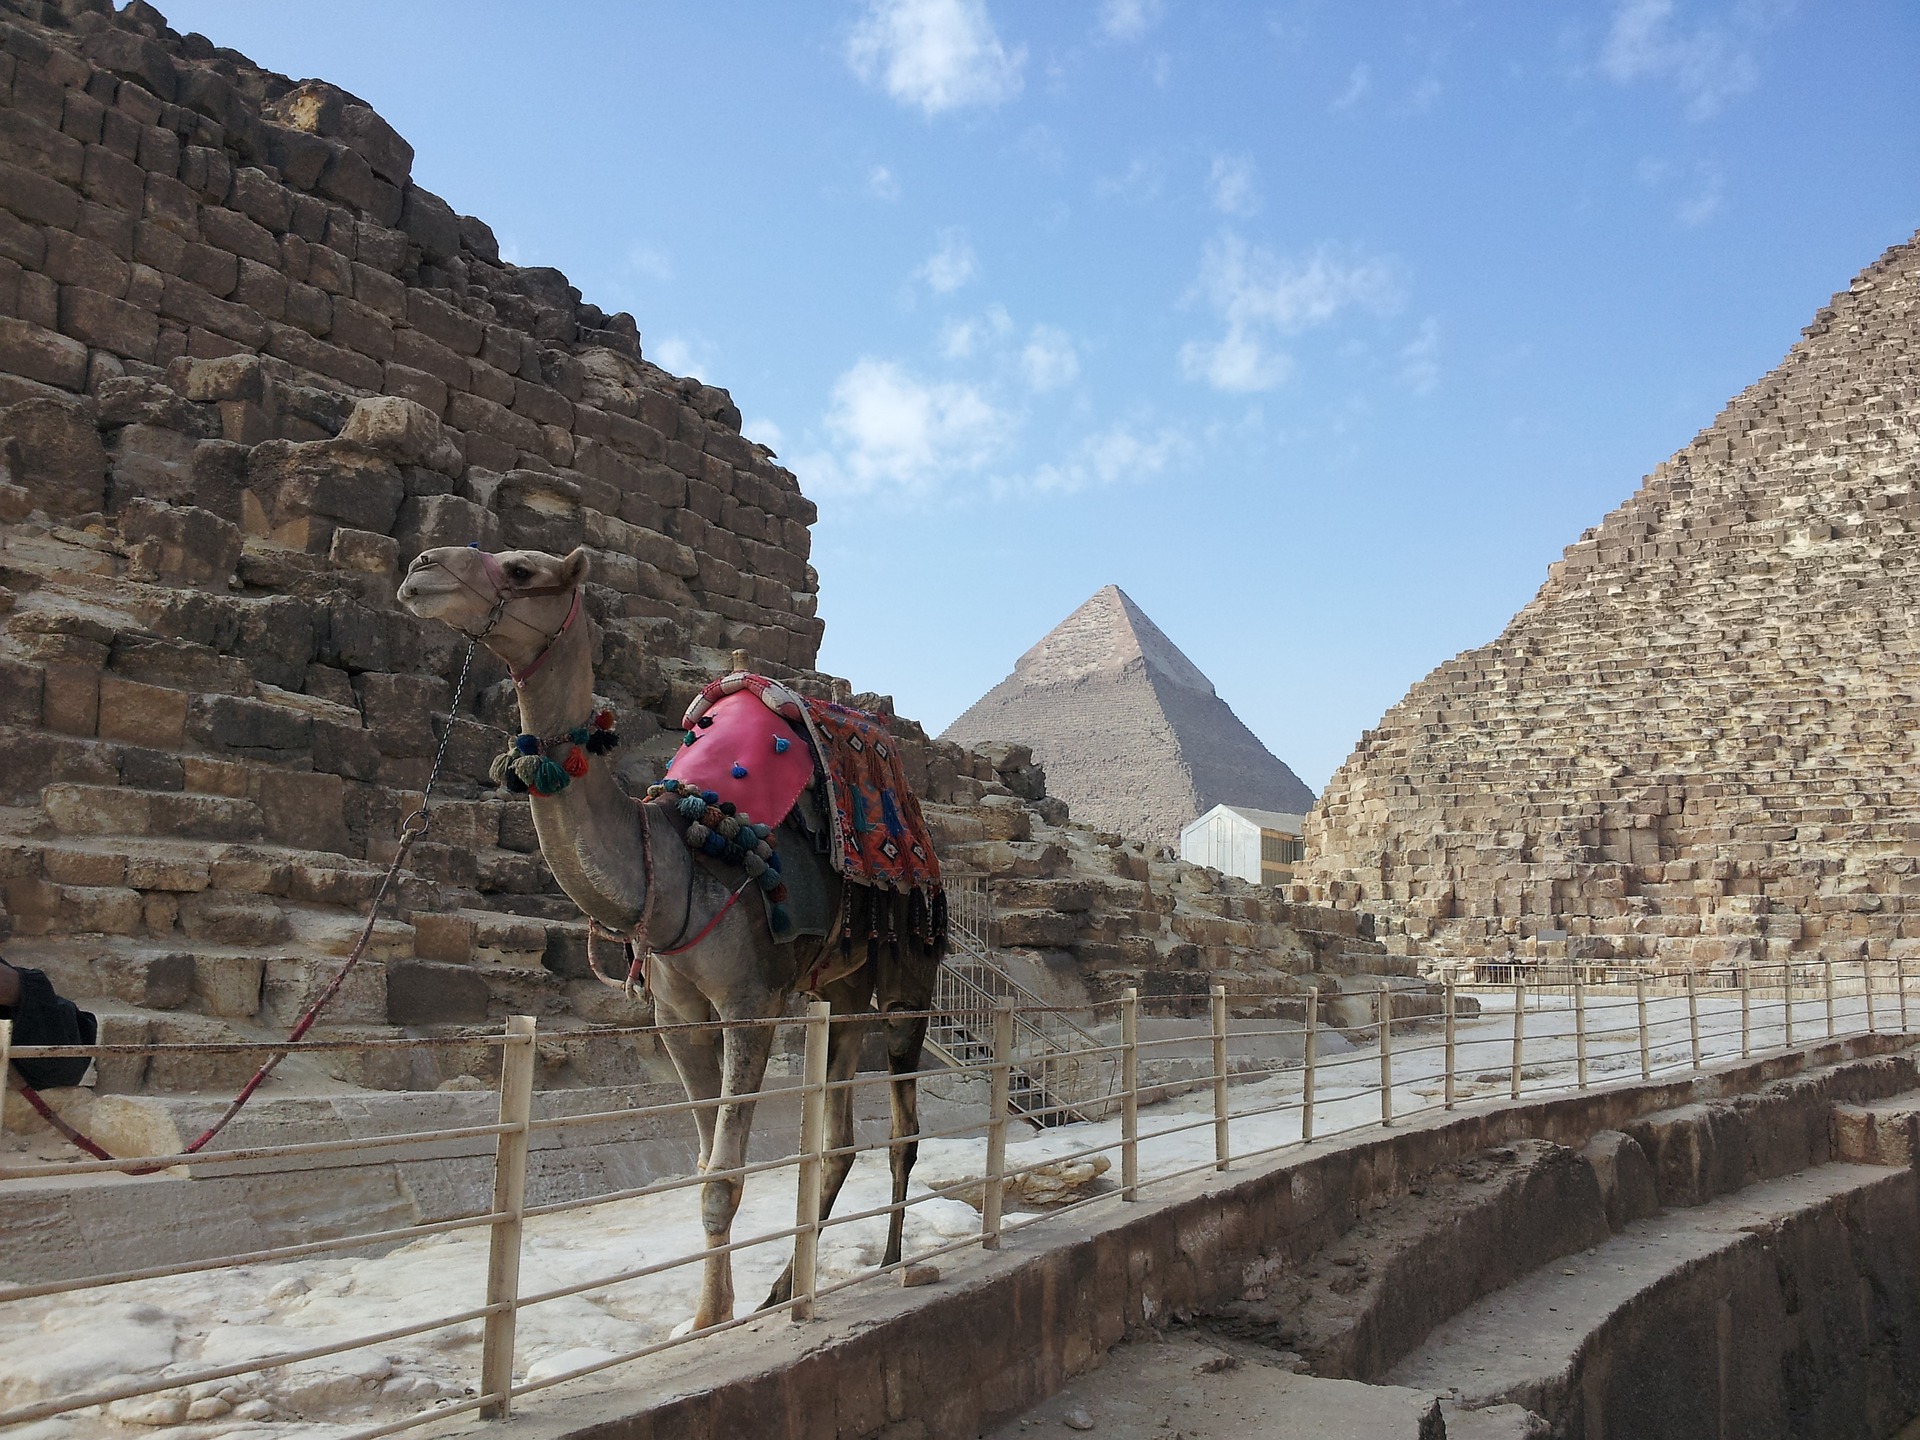 Day 2: Visiting Giza Pyramids, Sphinx & The Egyptian Museum